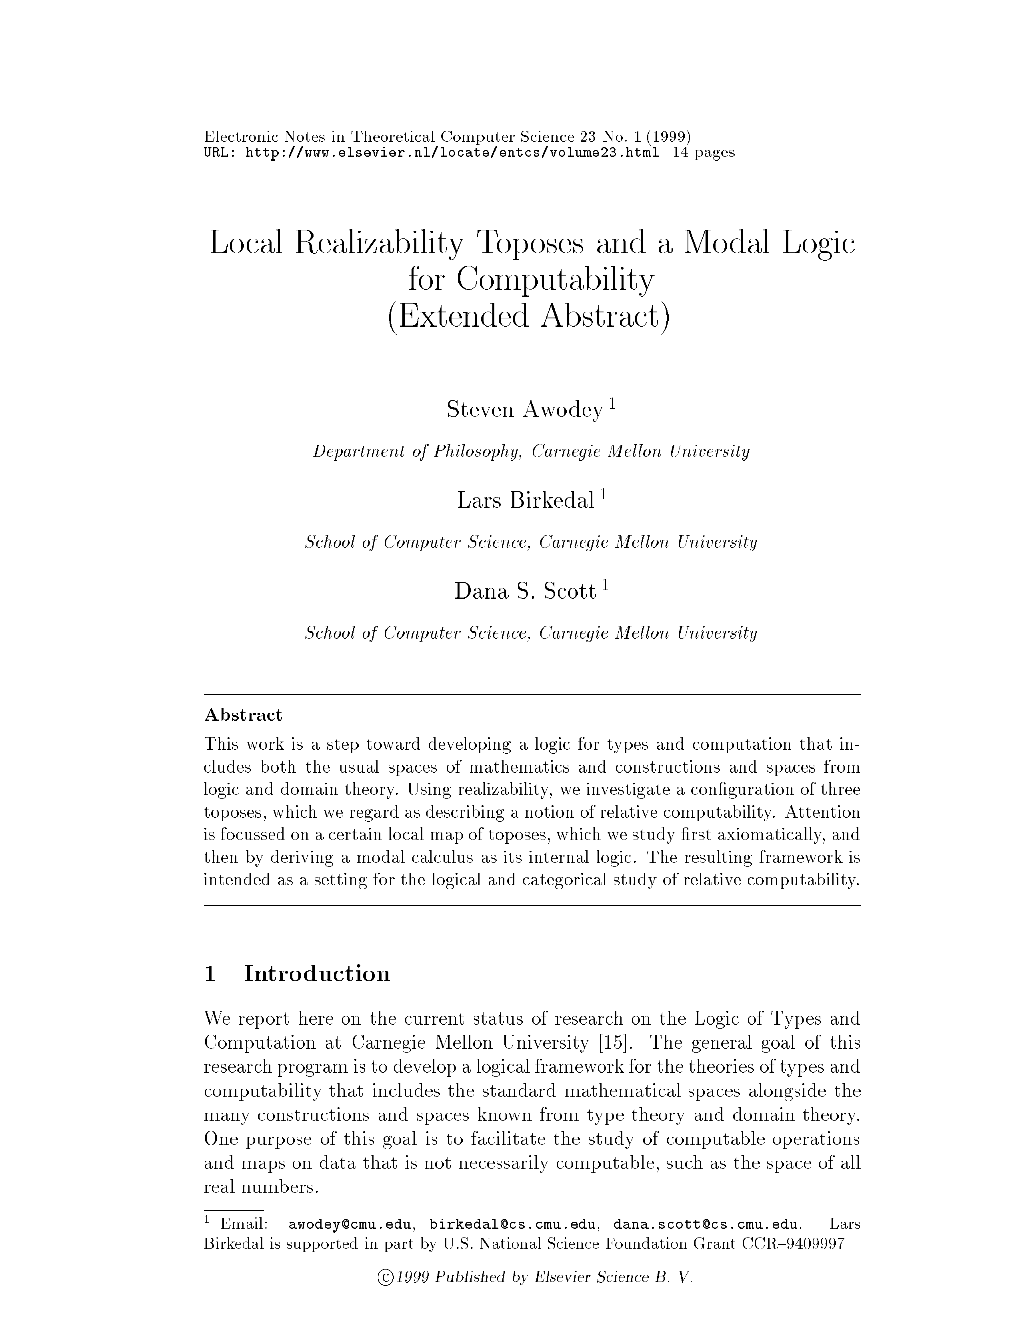 Local Realizability Toposes and a Modal Logic For